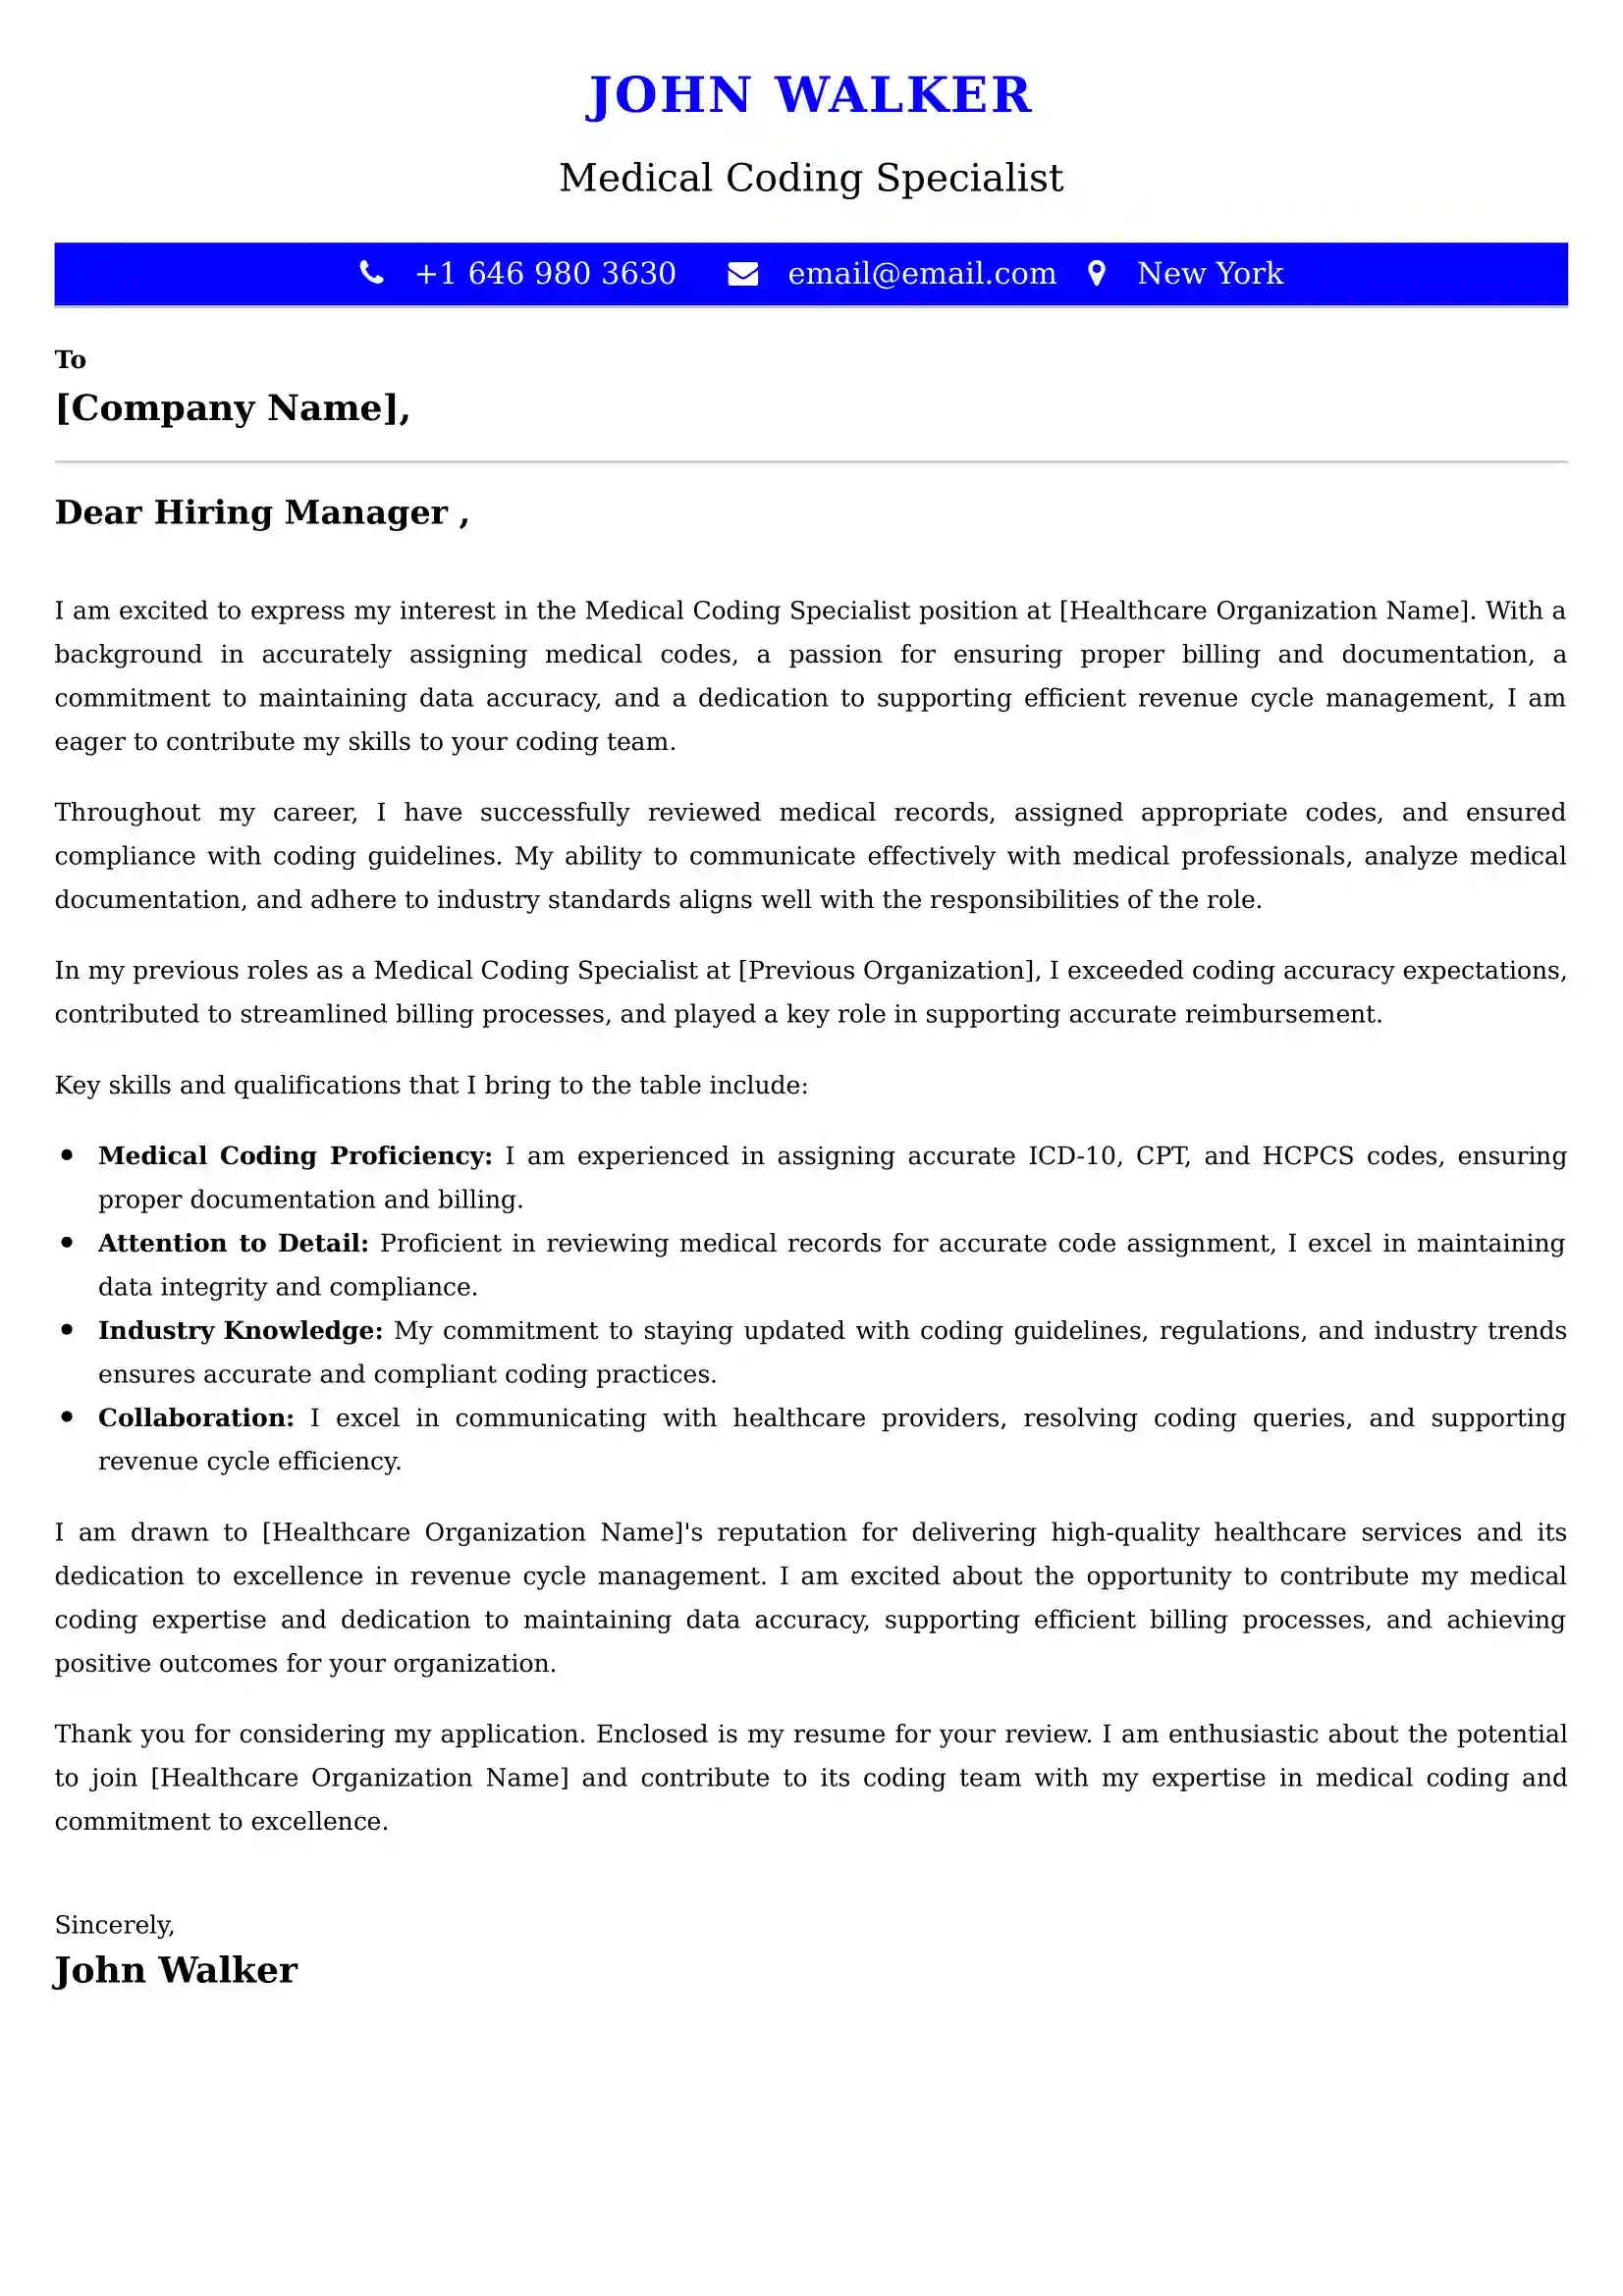 Medical Coding Specialist Cover Letter Examples - Latest UK Format